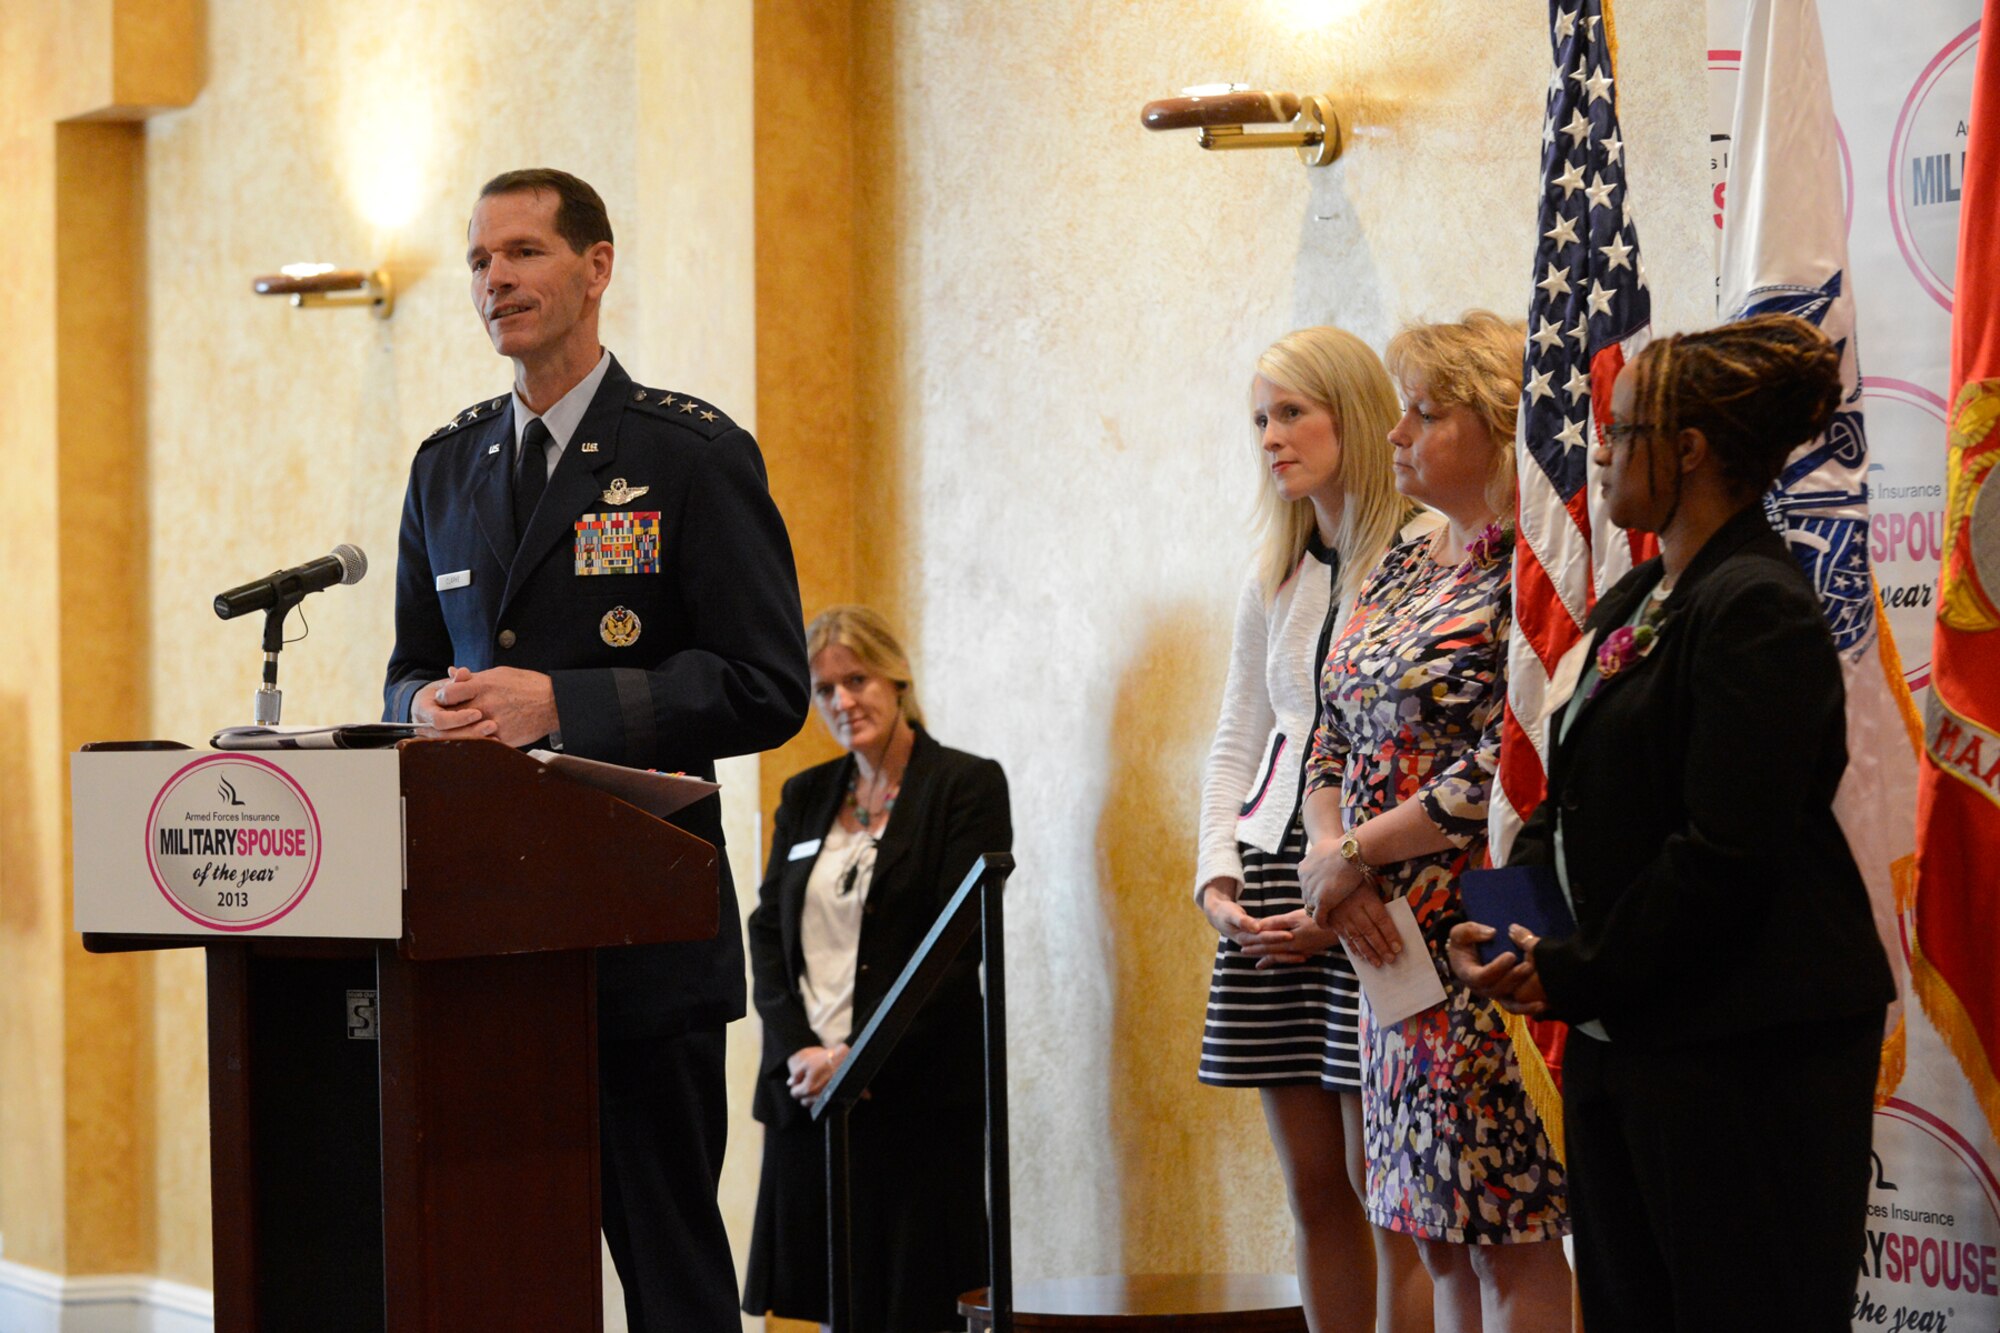 Lt. Gen. Stanley E. Clarke III, the director of the Air National Guard addresses the audience during the 2013 Military Spouse of the Year award ceremony, in Arlington, Va., May 9, 2013. Alicia Hinds Ward, 2013 National Guard Spouse of the Year, won the 2013 Military Spouse of the Year award. The award, presented by Military Spouse magazine and sponsored by Armed Forces Insurance, honors spouses of military members. (Air Force photo by Scott Ash/RELEASED)